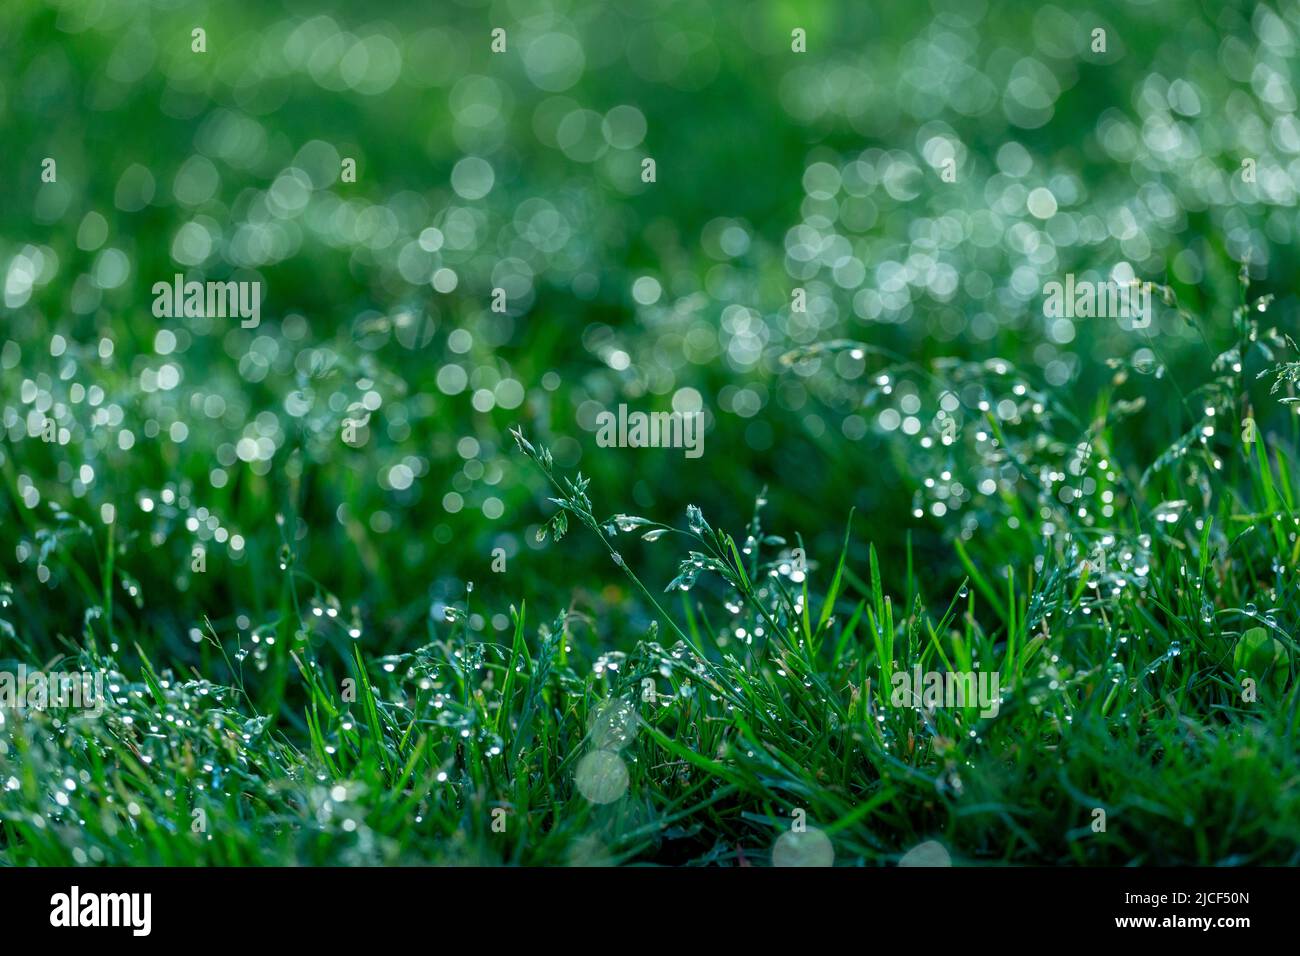 Cold colored grass bokeh background. Outdoor drop blurred spring morning. Stock Photo